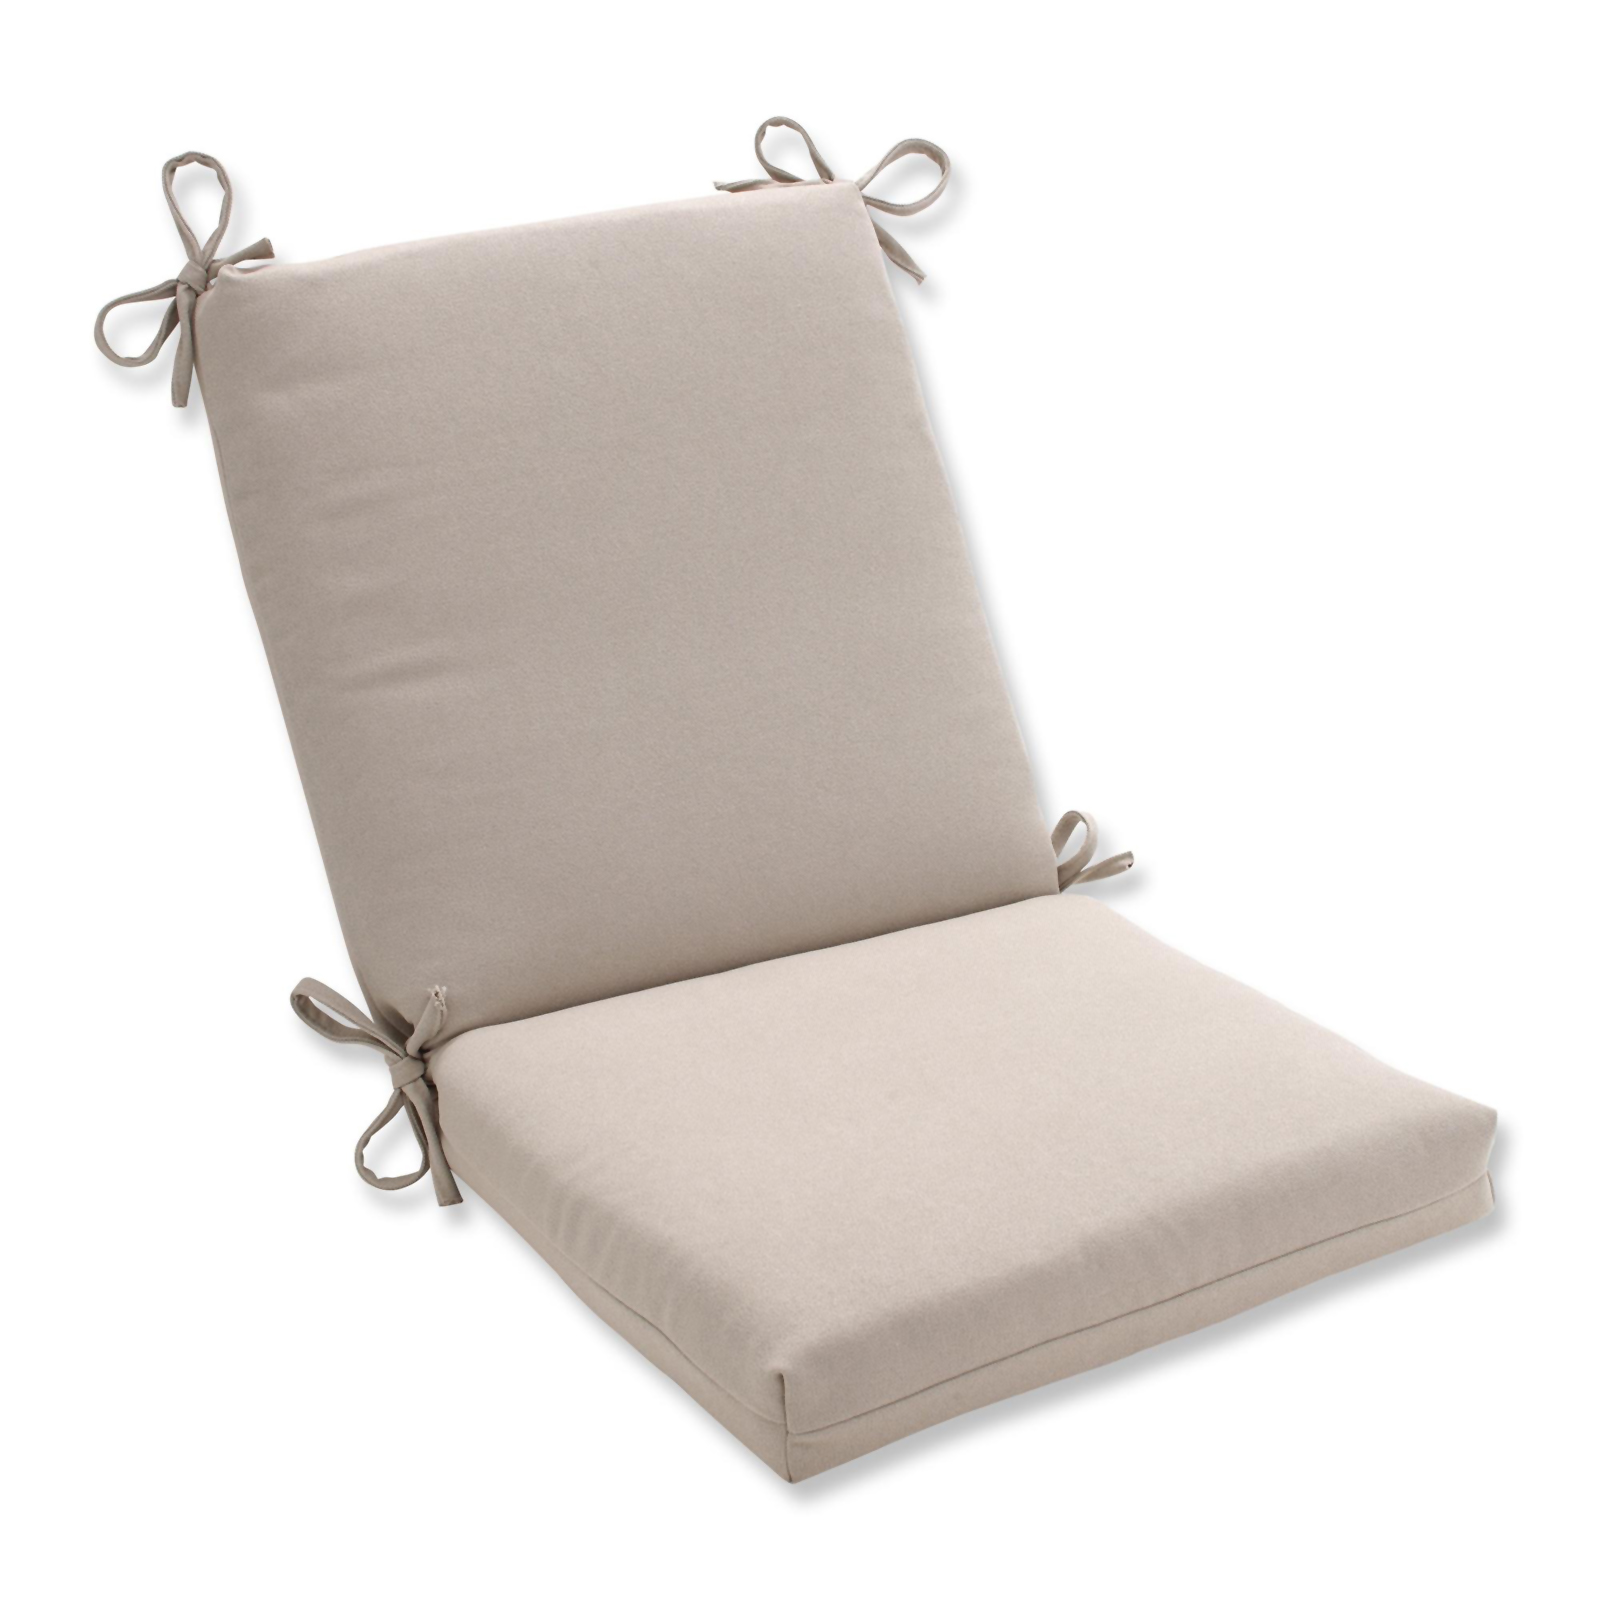 Pillow Perfect Outdoor Solid Square Chair Cushion - Beige